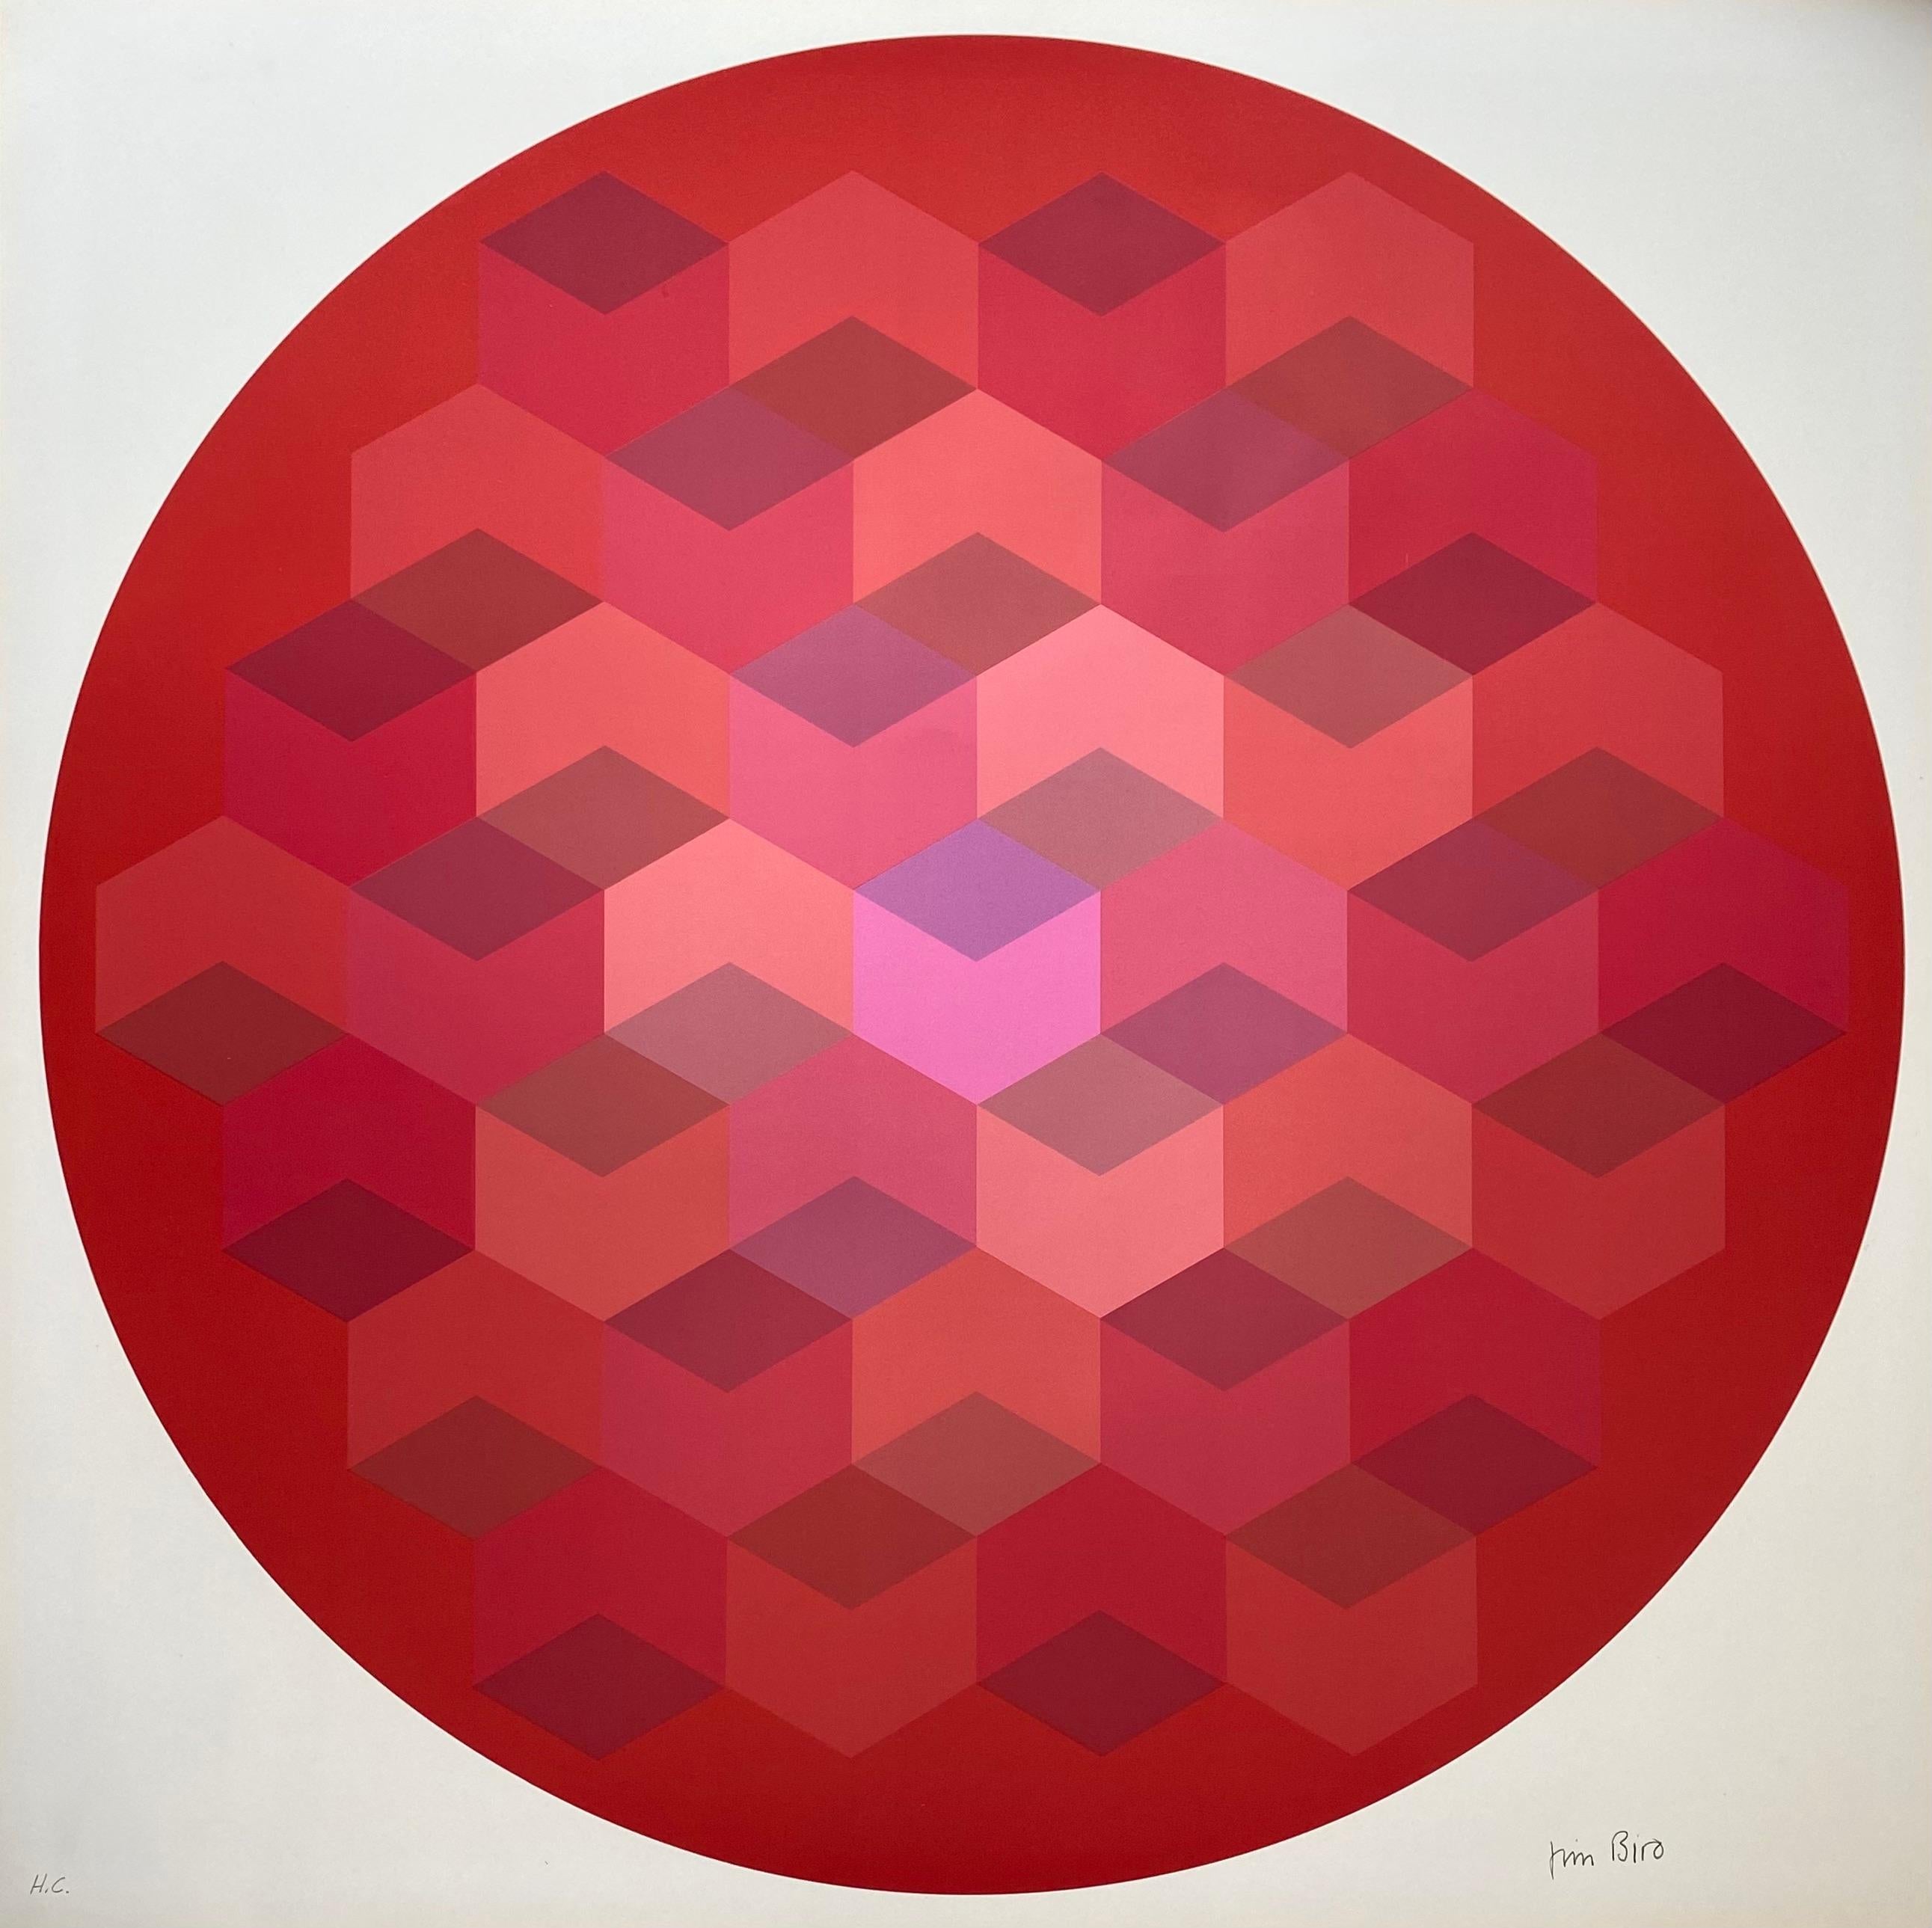 Jim Bird, Tribute to Vasarely 8, 1970 For Sale 1